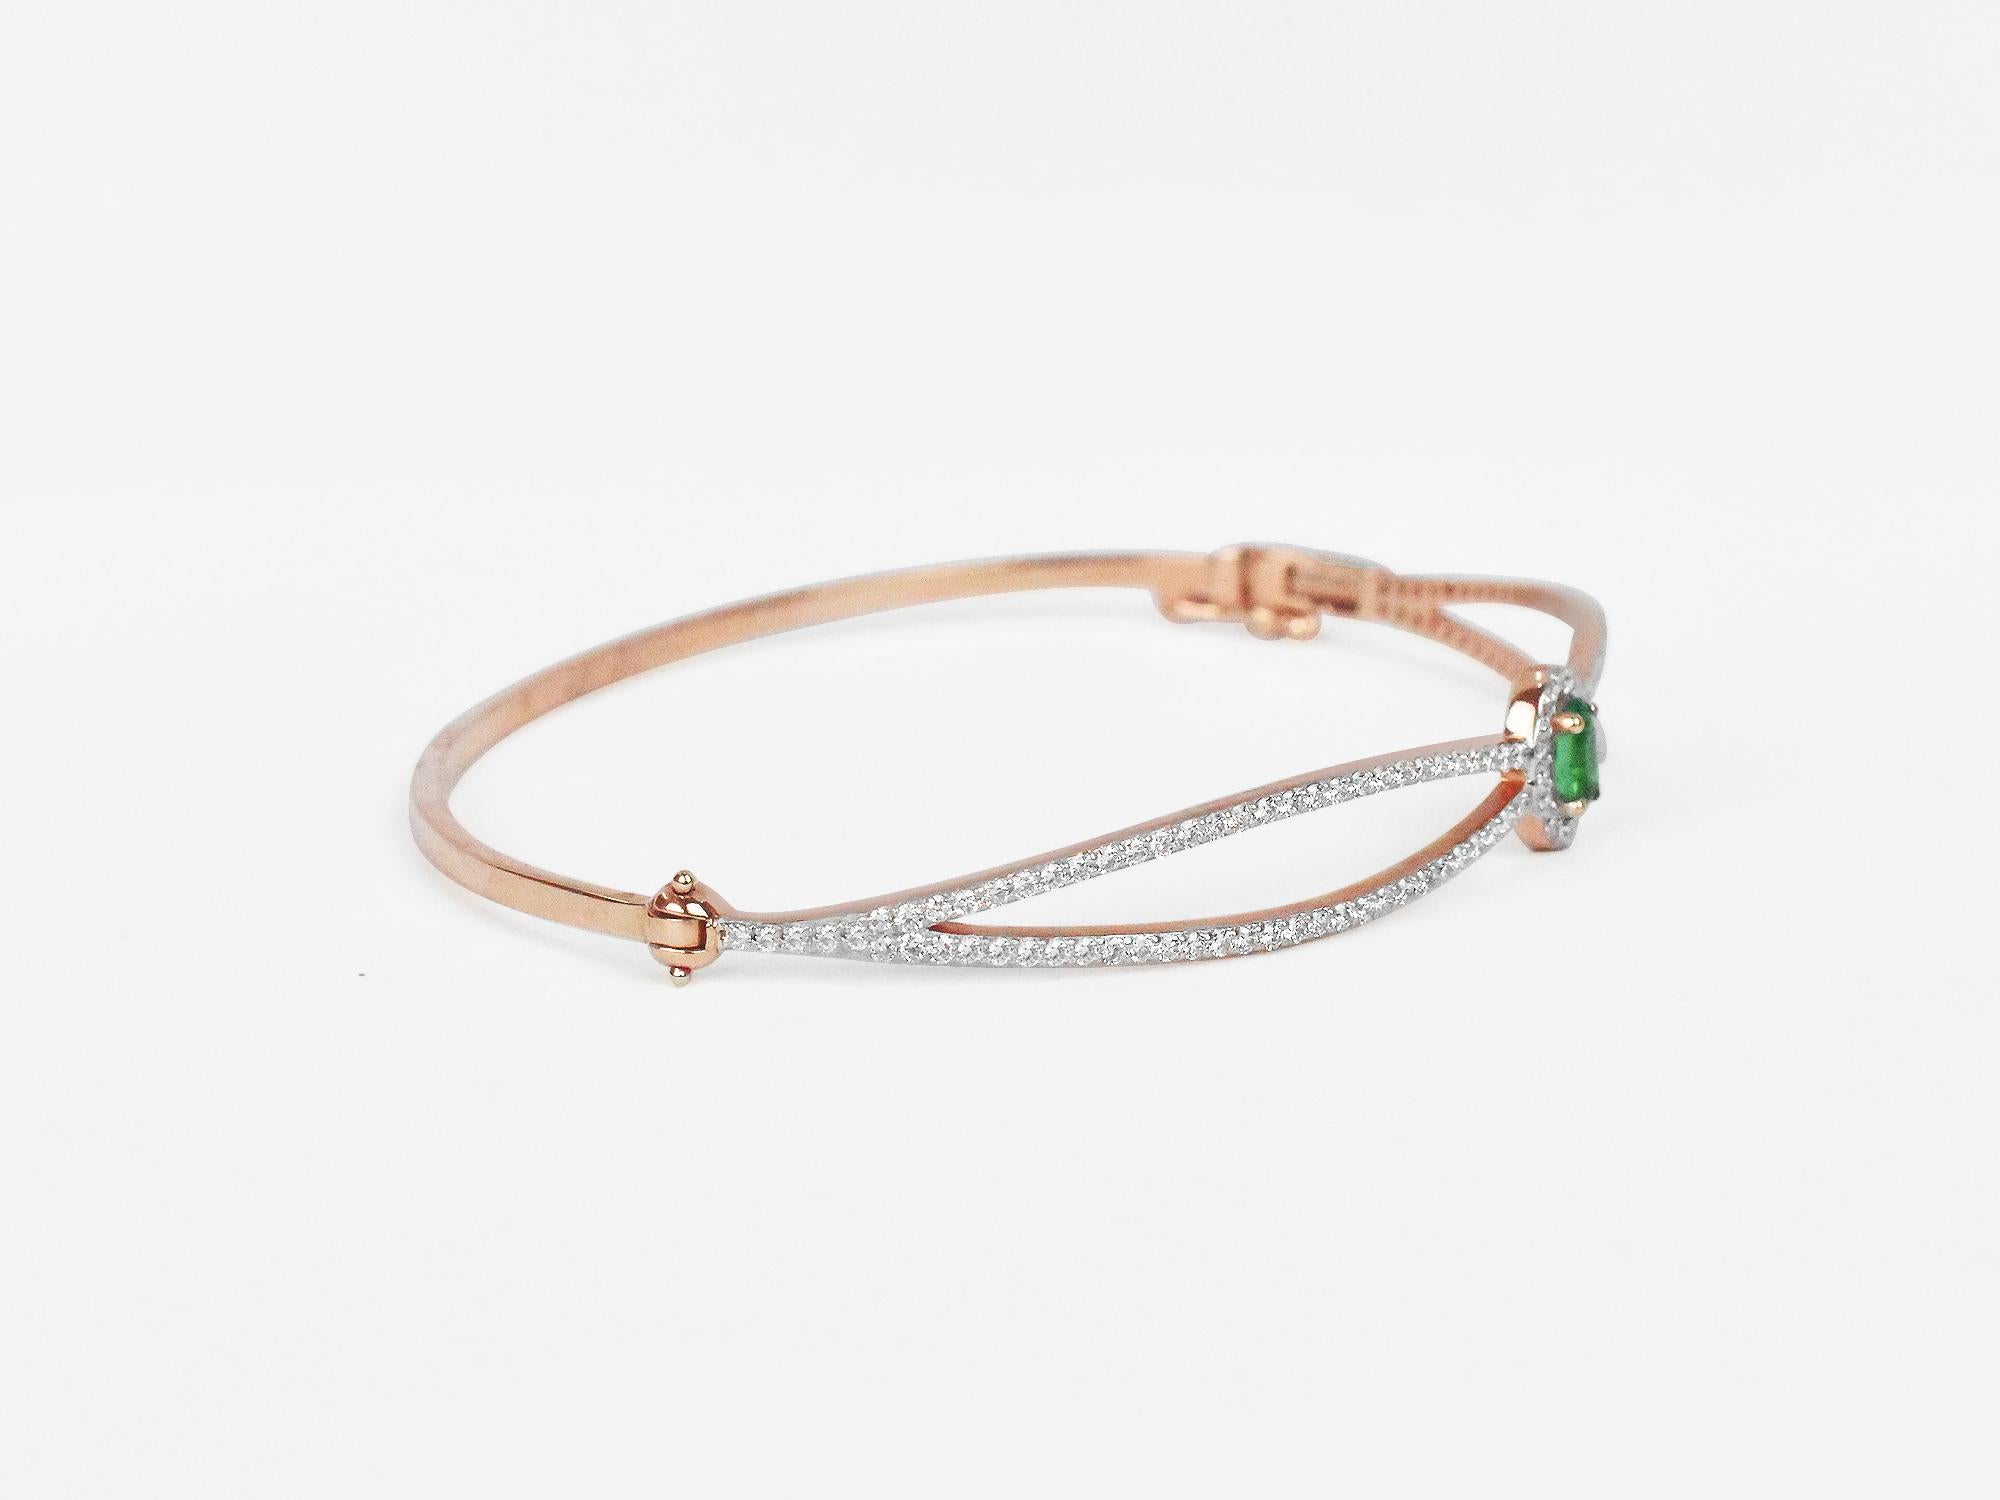 18Karat Gold Rose Gold Emerald Oval Diamond Pave Bangle Bracelet
            An 18K solid Rose Gold hinge bangle. An elegent piece of jewelry for enjoying life every day with a celebration of unbound freedom. A treasure crafted by Oshi Jewels